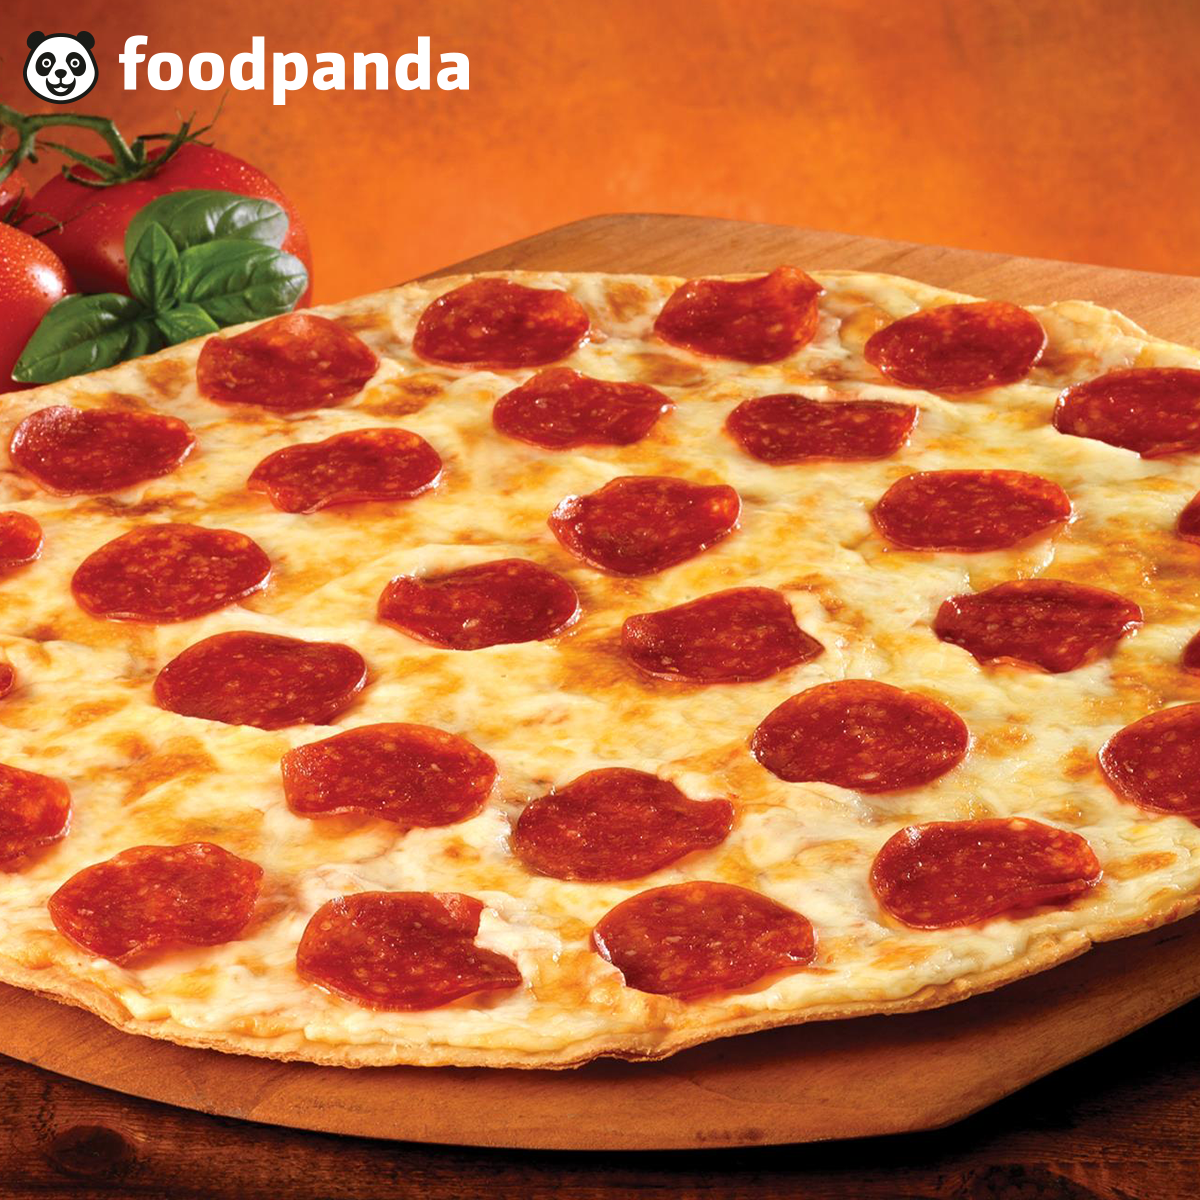 Foodpanda Malaysia On Twitter Saturday Calls For A Pizza Day